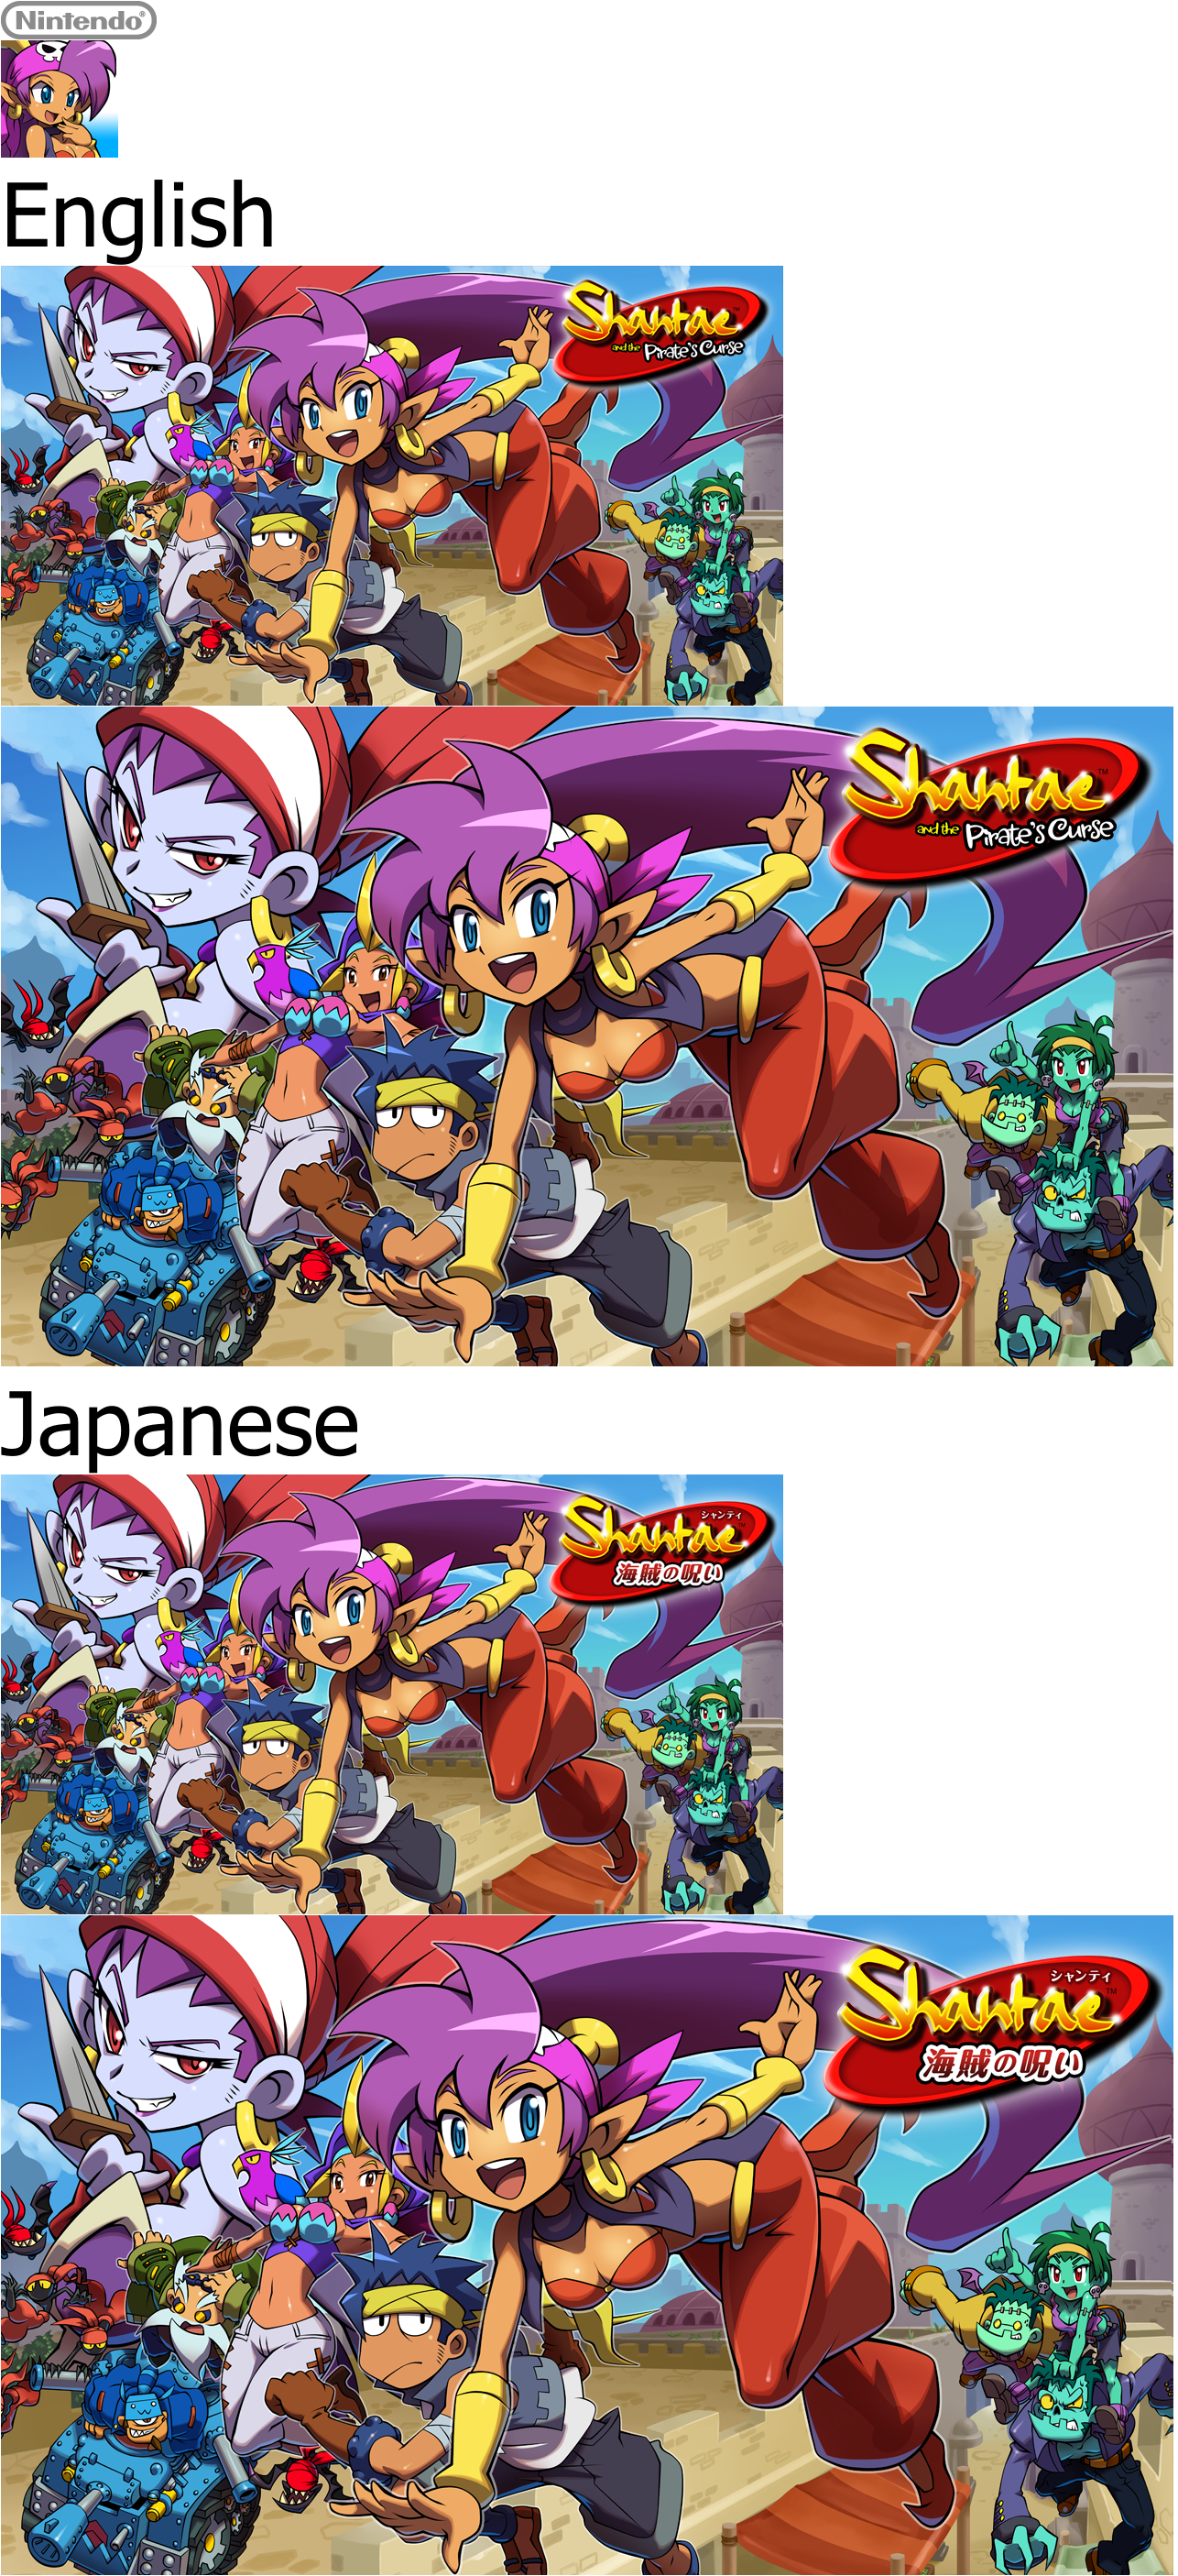 Shantae and the Pirate's Curse - HOME Menu Icon and Banners